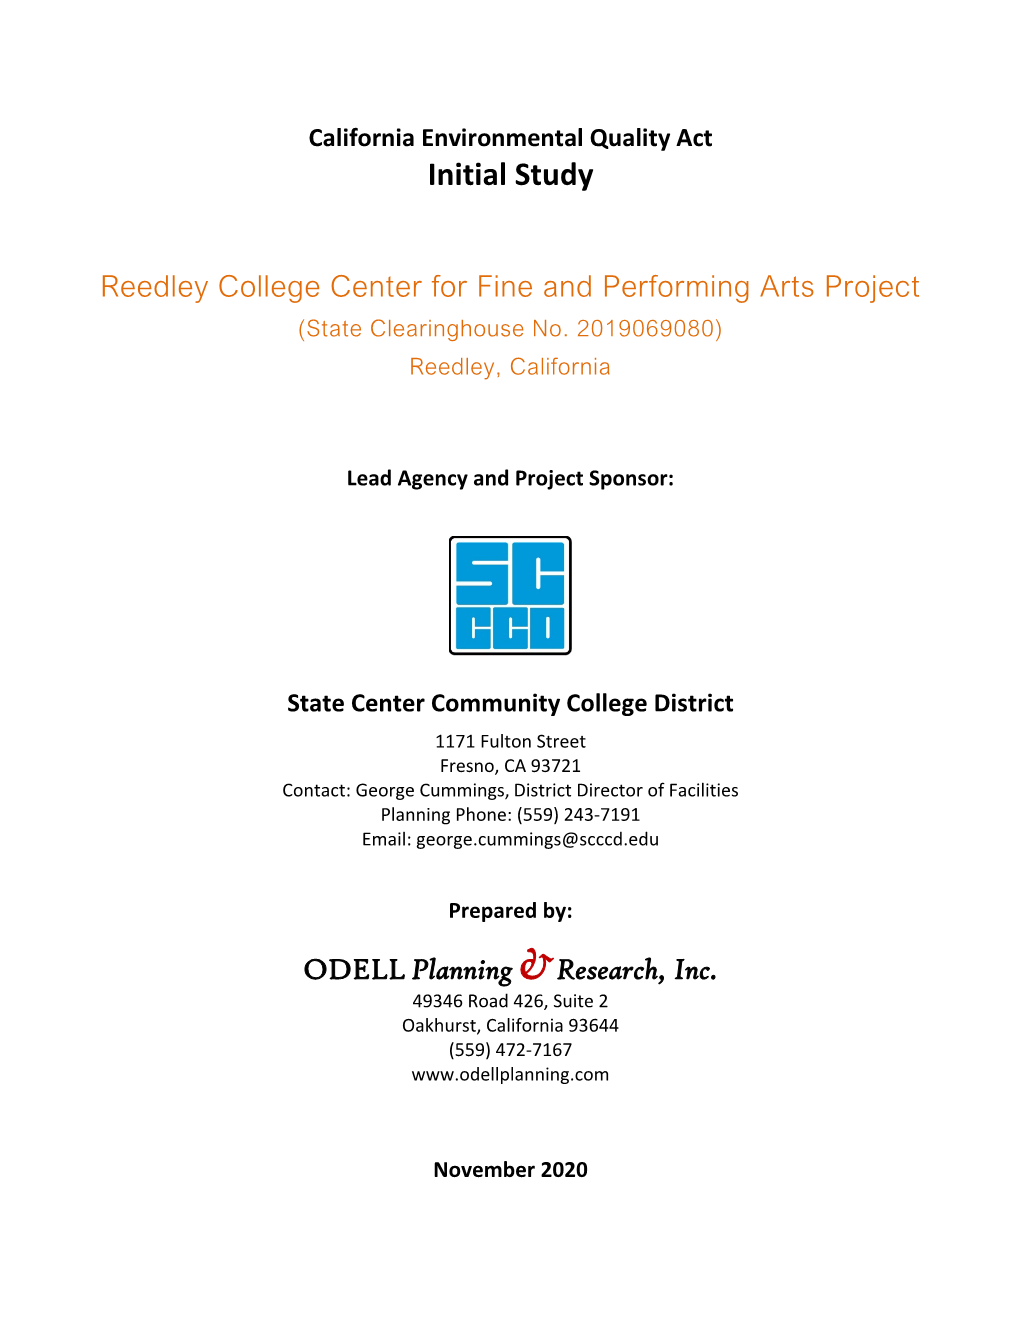 Reedley College Center for Fine and Performing Arts Project (State Clearinghouse No